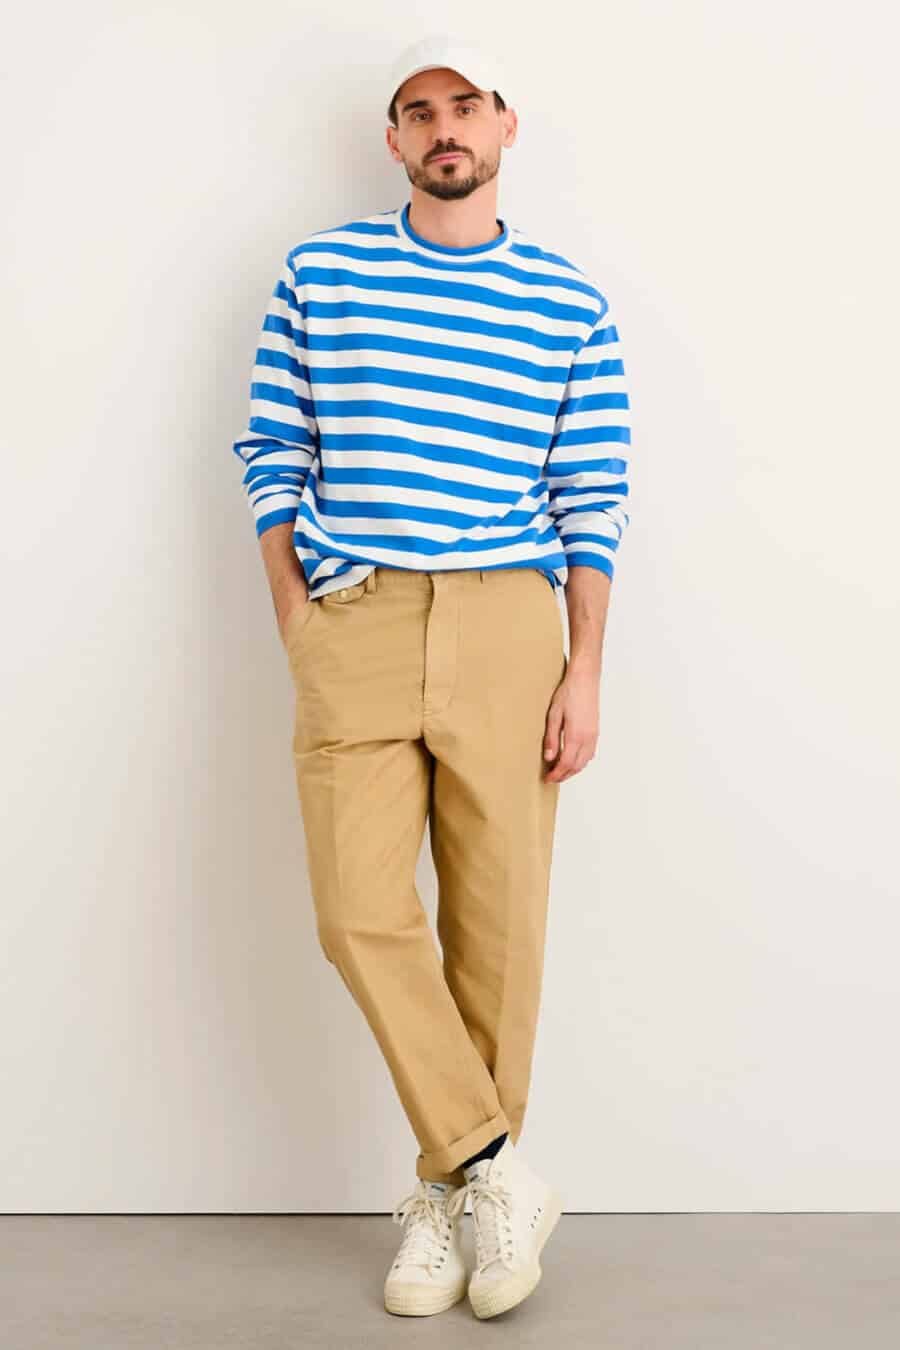 Men's summer breton top and relaxed leg chinos with white sneakers and baseball cap outfit